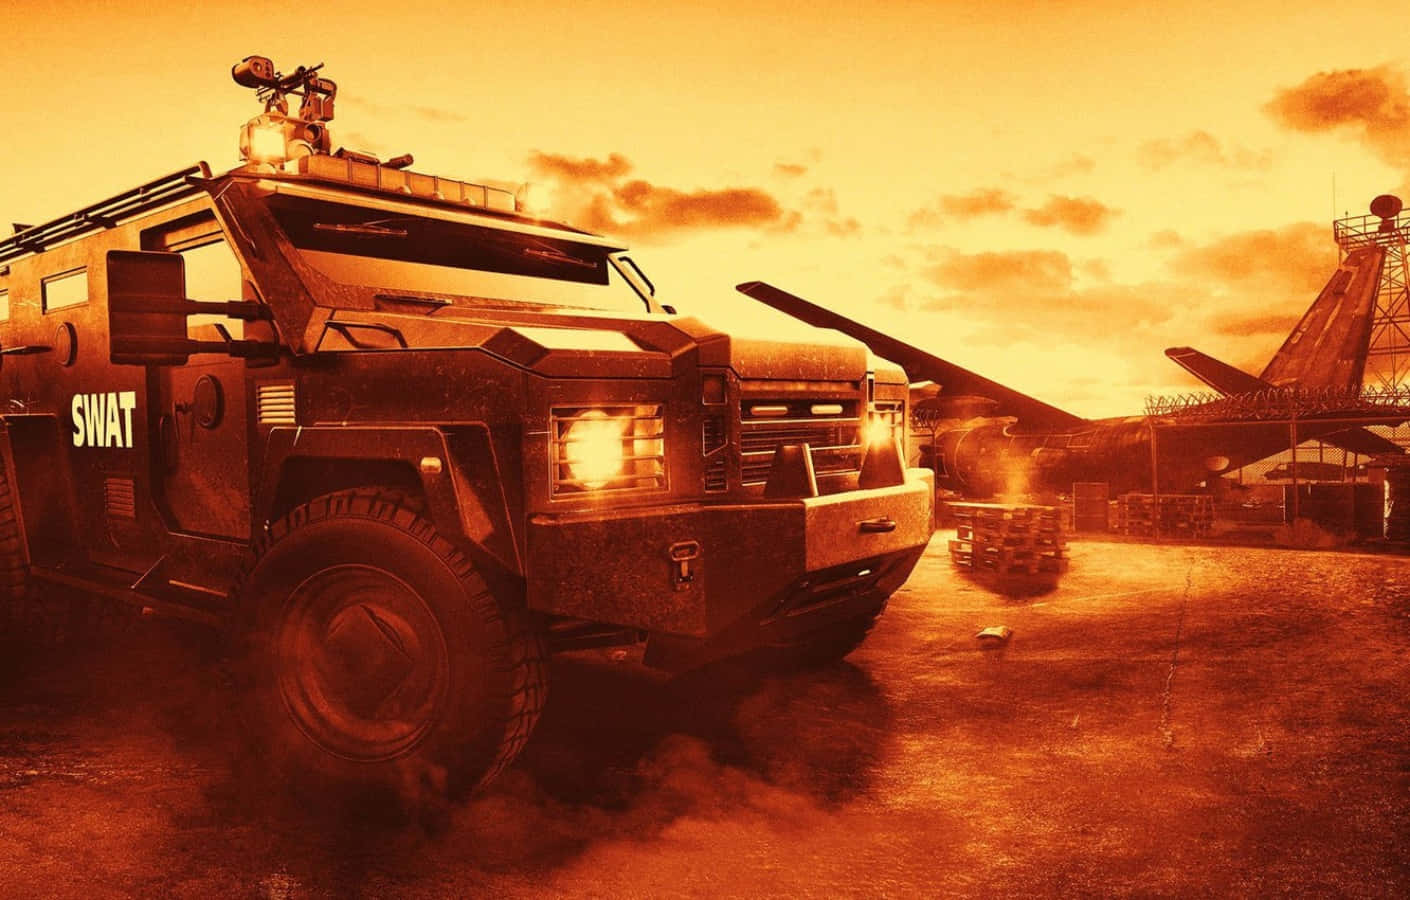 Intense Battlefield with Armored Vehicles in Action Wallpaper